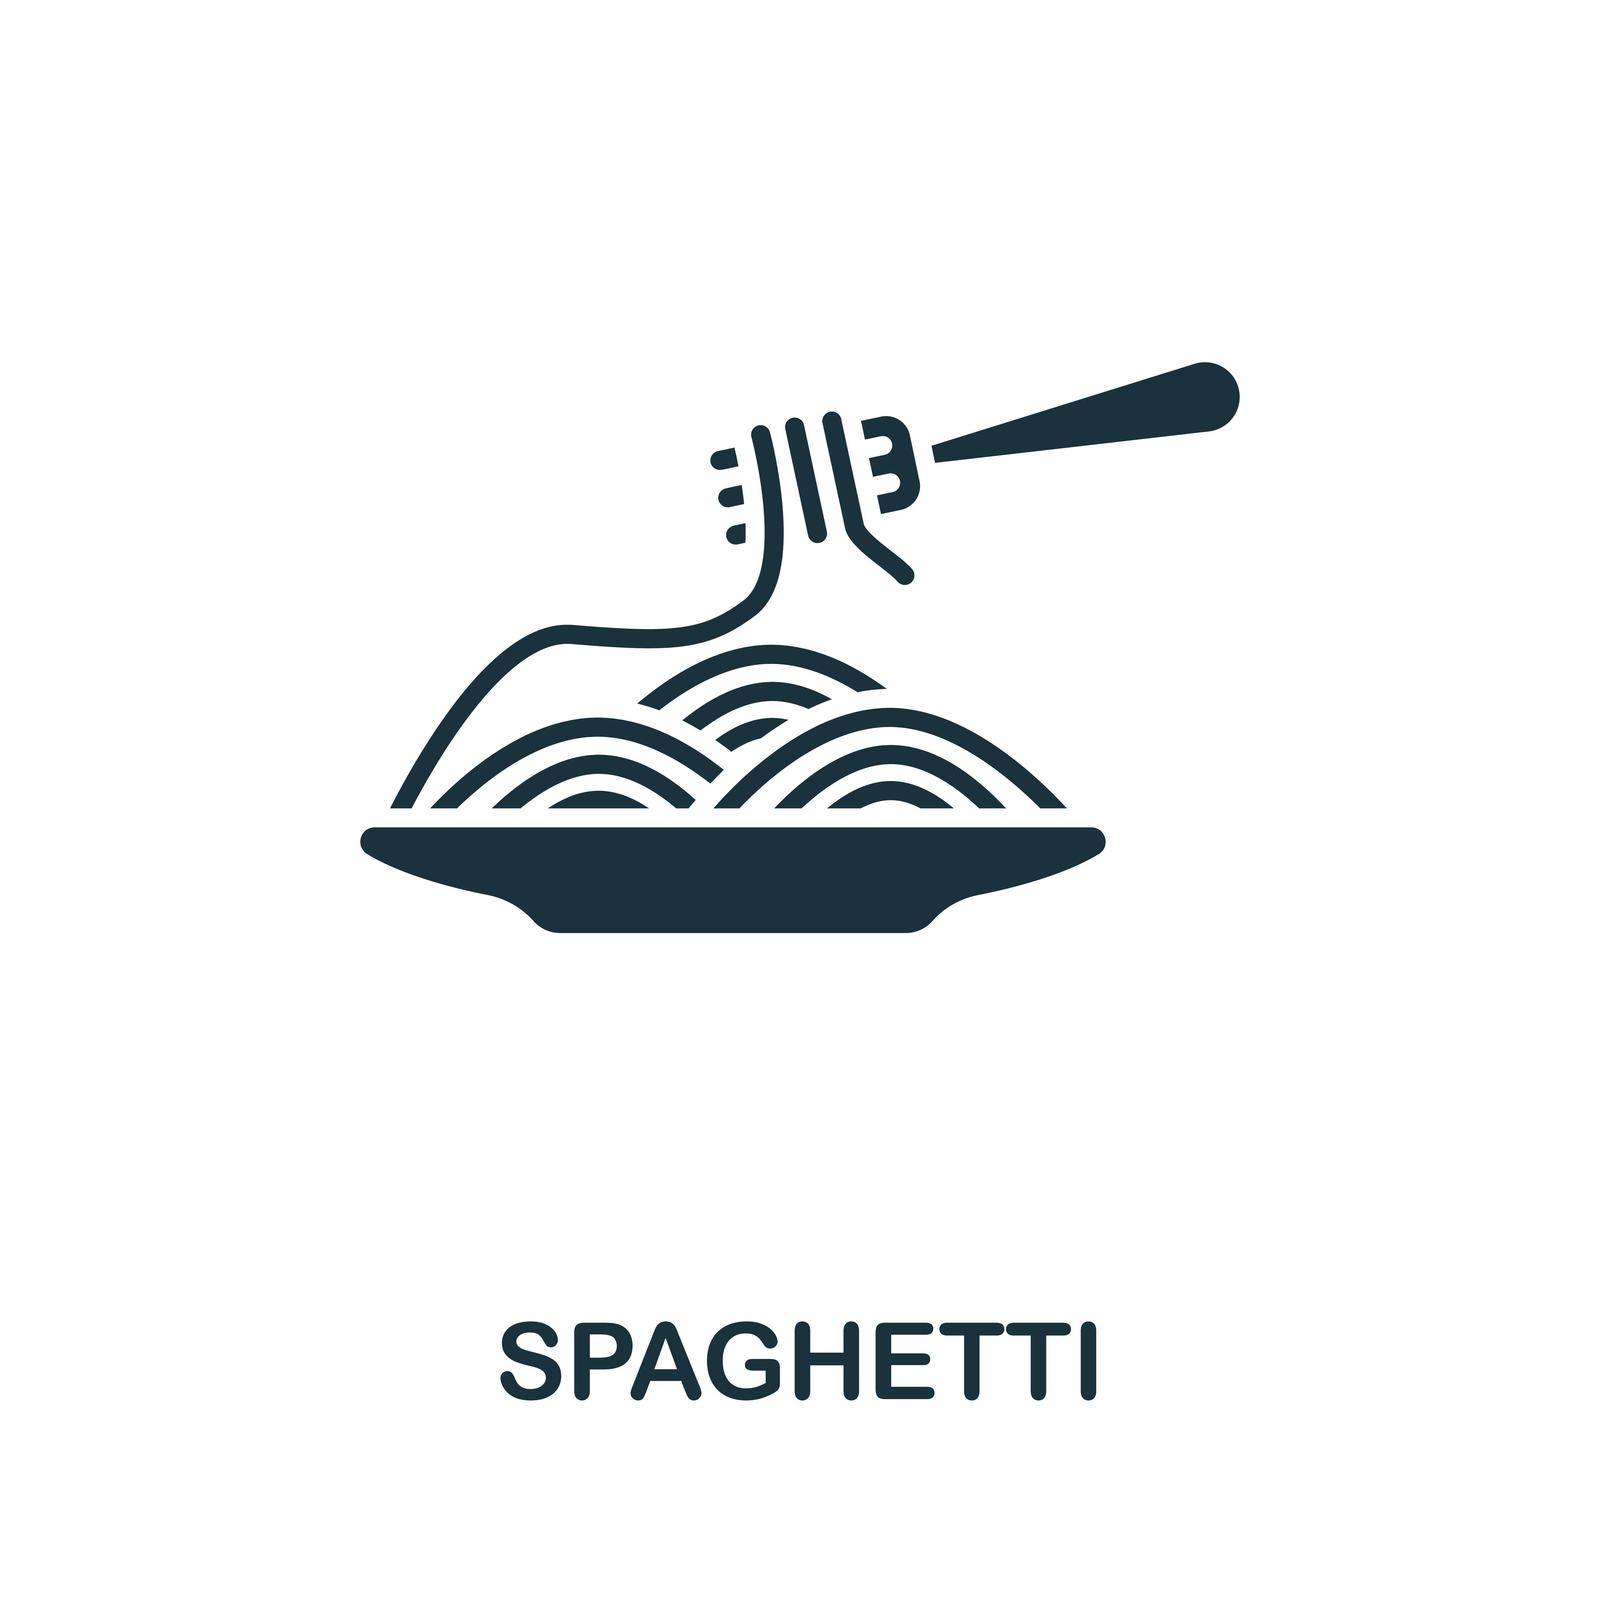 Spaghetti icon. Monochrome simple line Fastfood icon for templates, web design and infographics by simakovavector